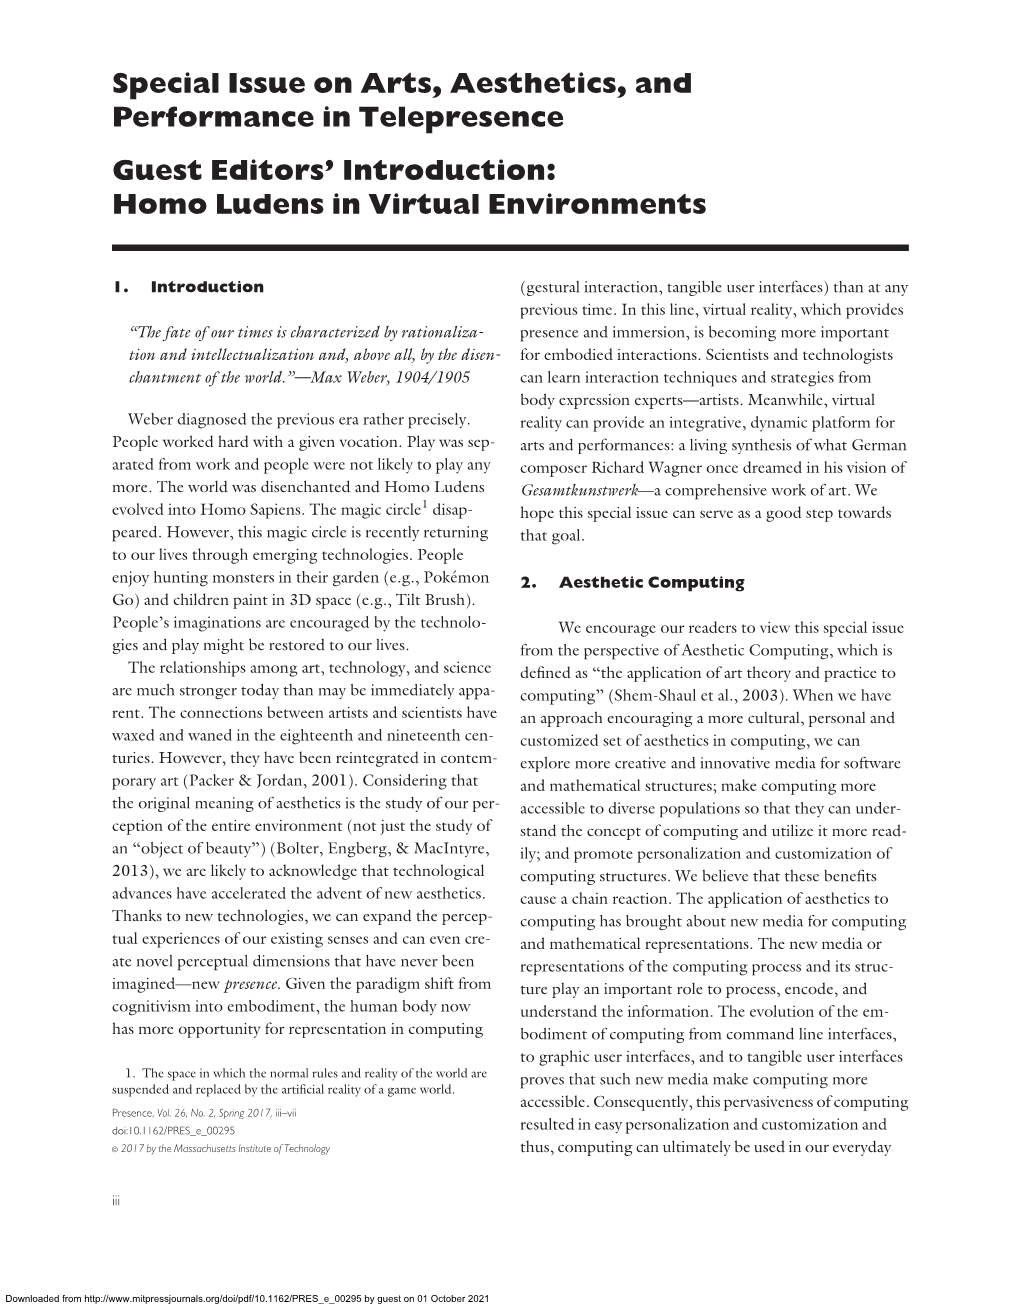 Special Issue on Arts, Aesthetics, and Performance in Telepresence Guest Editors’ Introduction: Homo Ludens in Virtual Environments